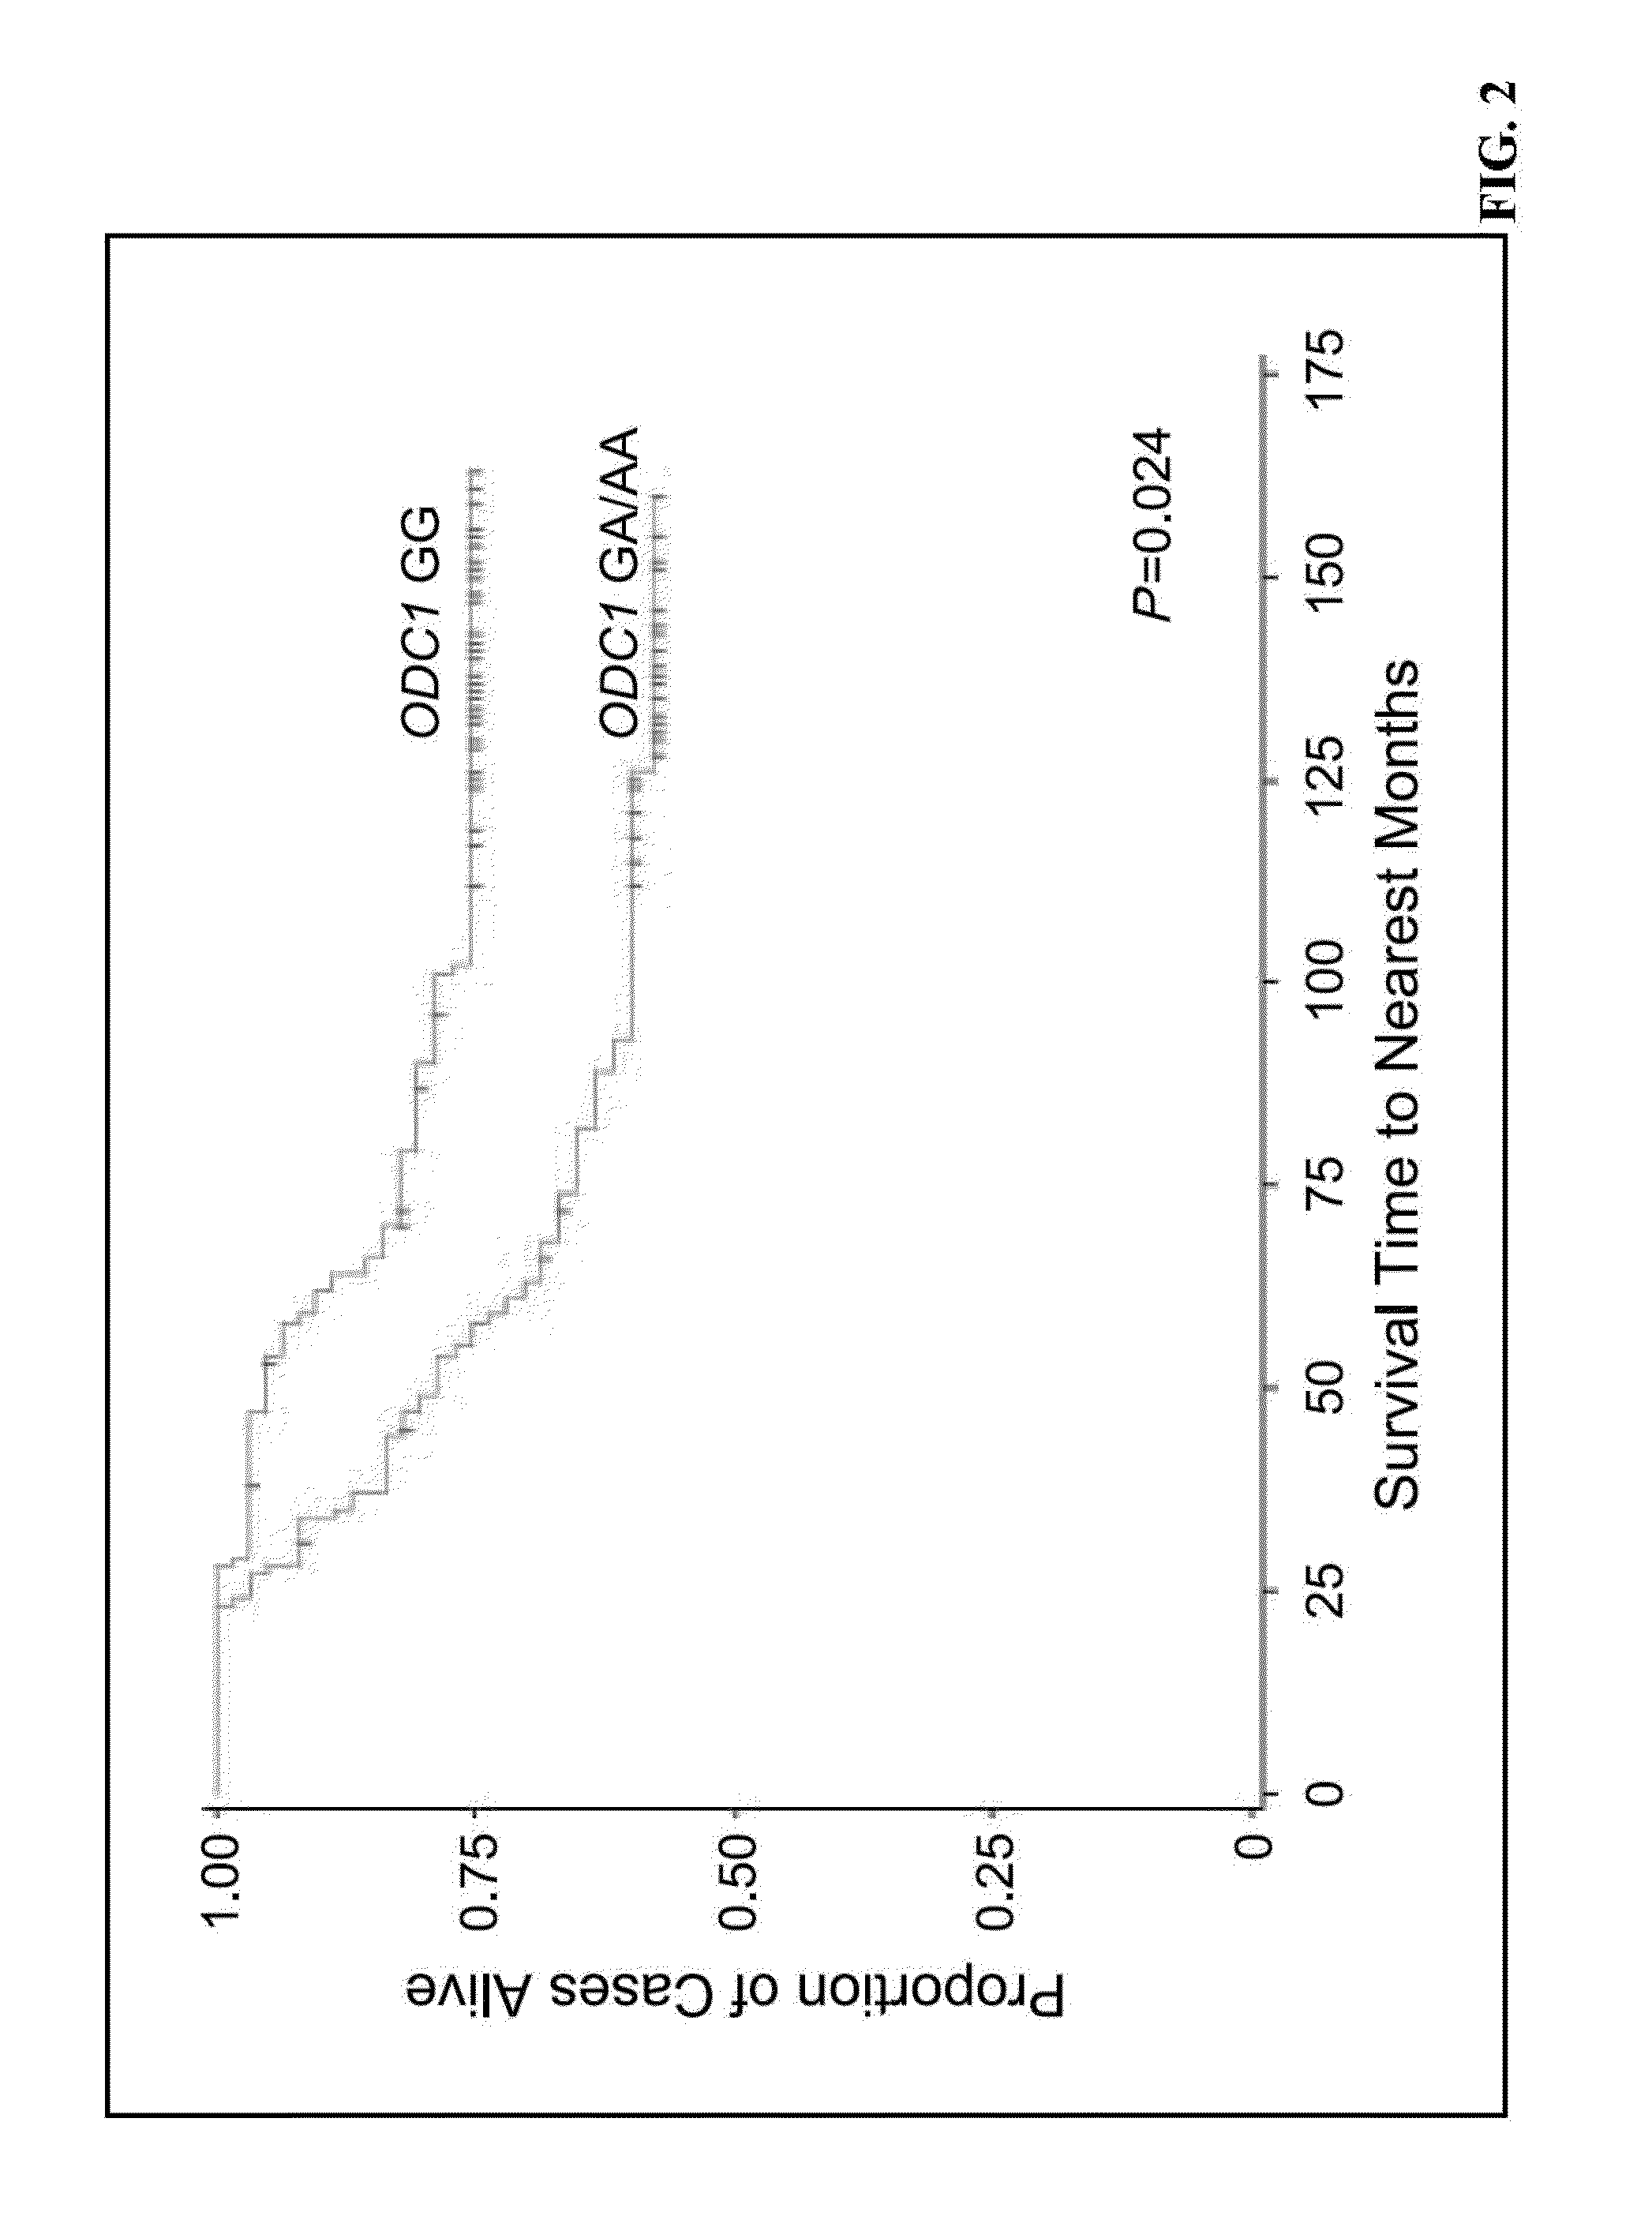 Cancer prevention and treatment methods based on dietary polyamine content